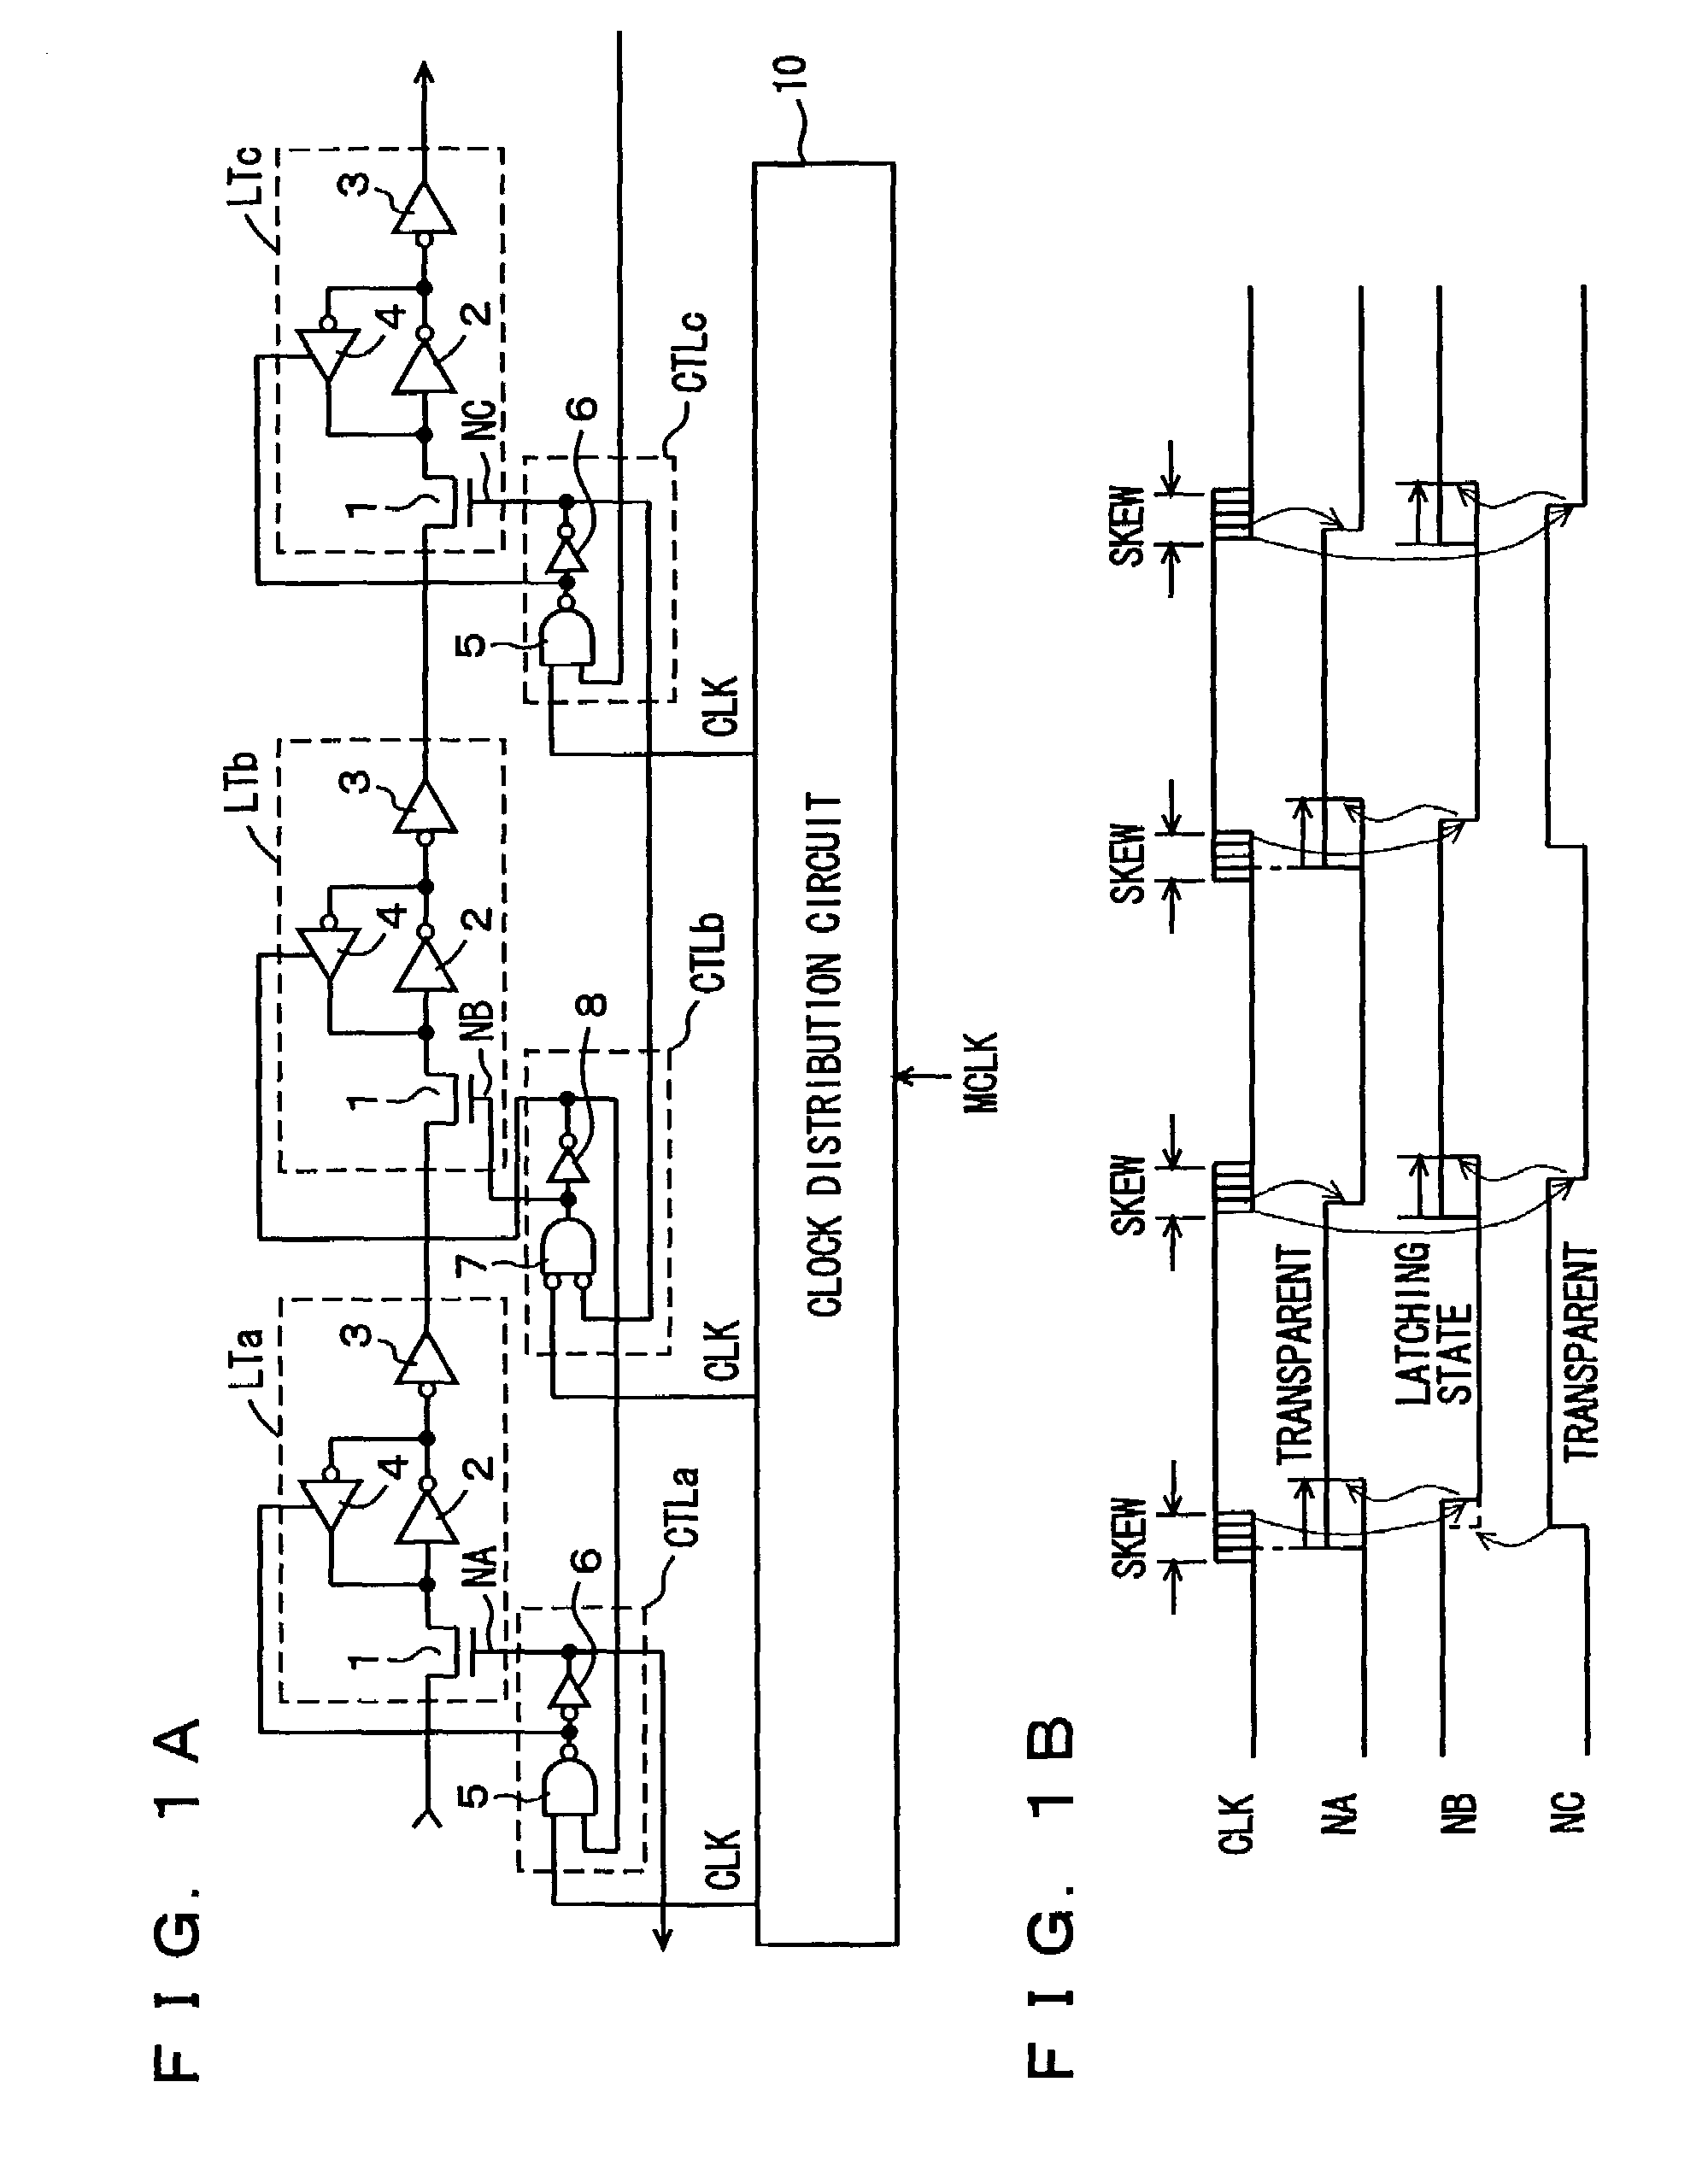 Synchronous signal transfer and processing device